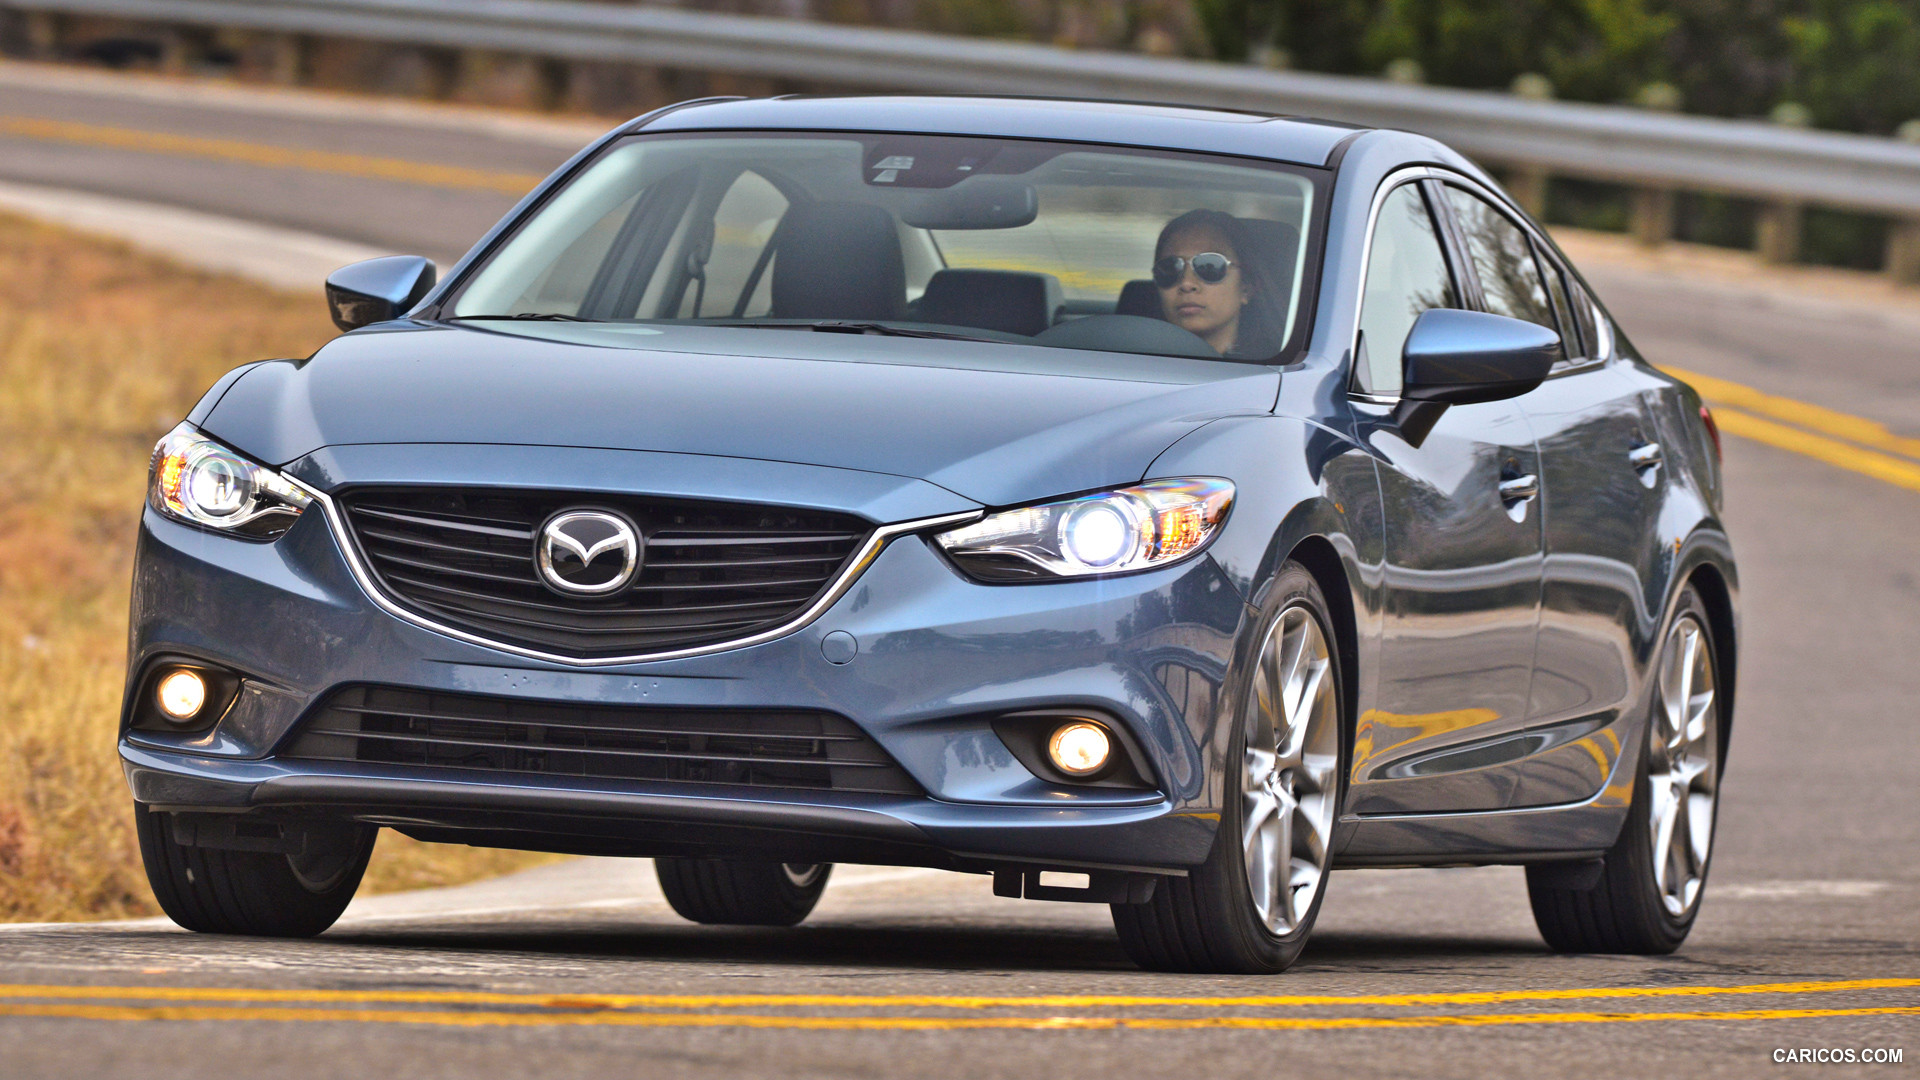 2014 Mazda6 GT - Front, #106 of 179